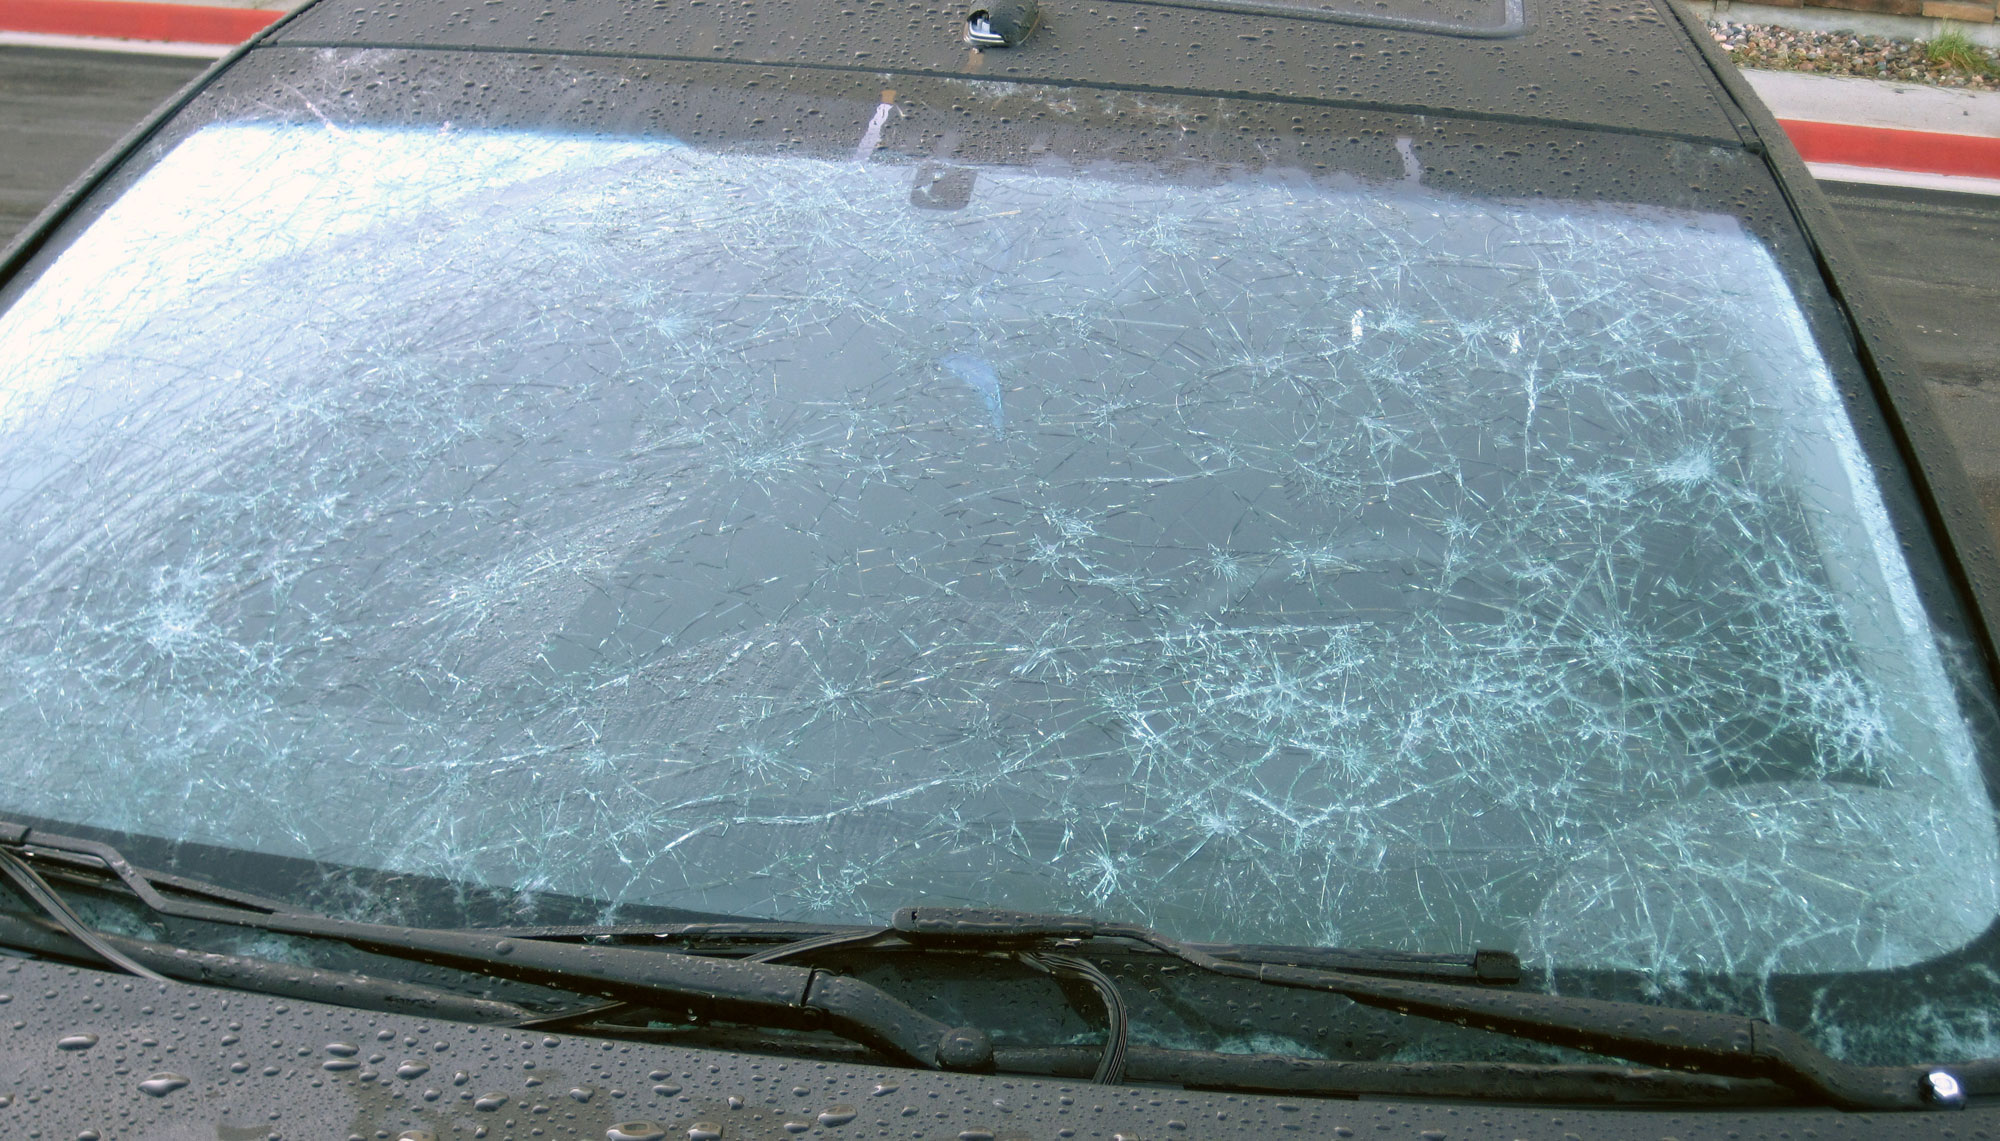 Photograph of a car windshield showing impact marks with radiating cracks where hailstones hit the glass.